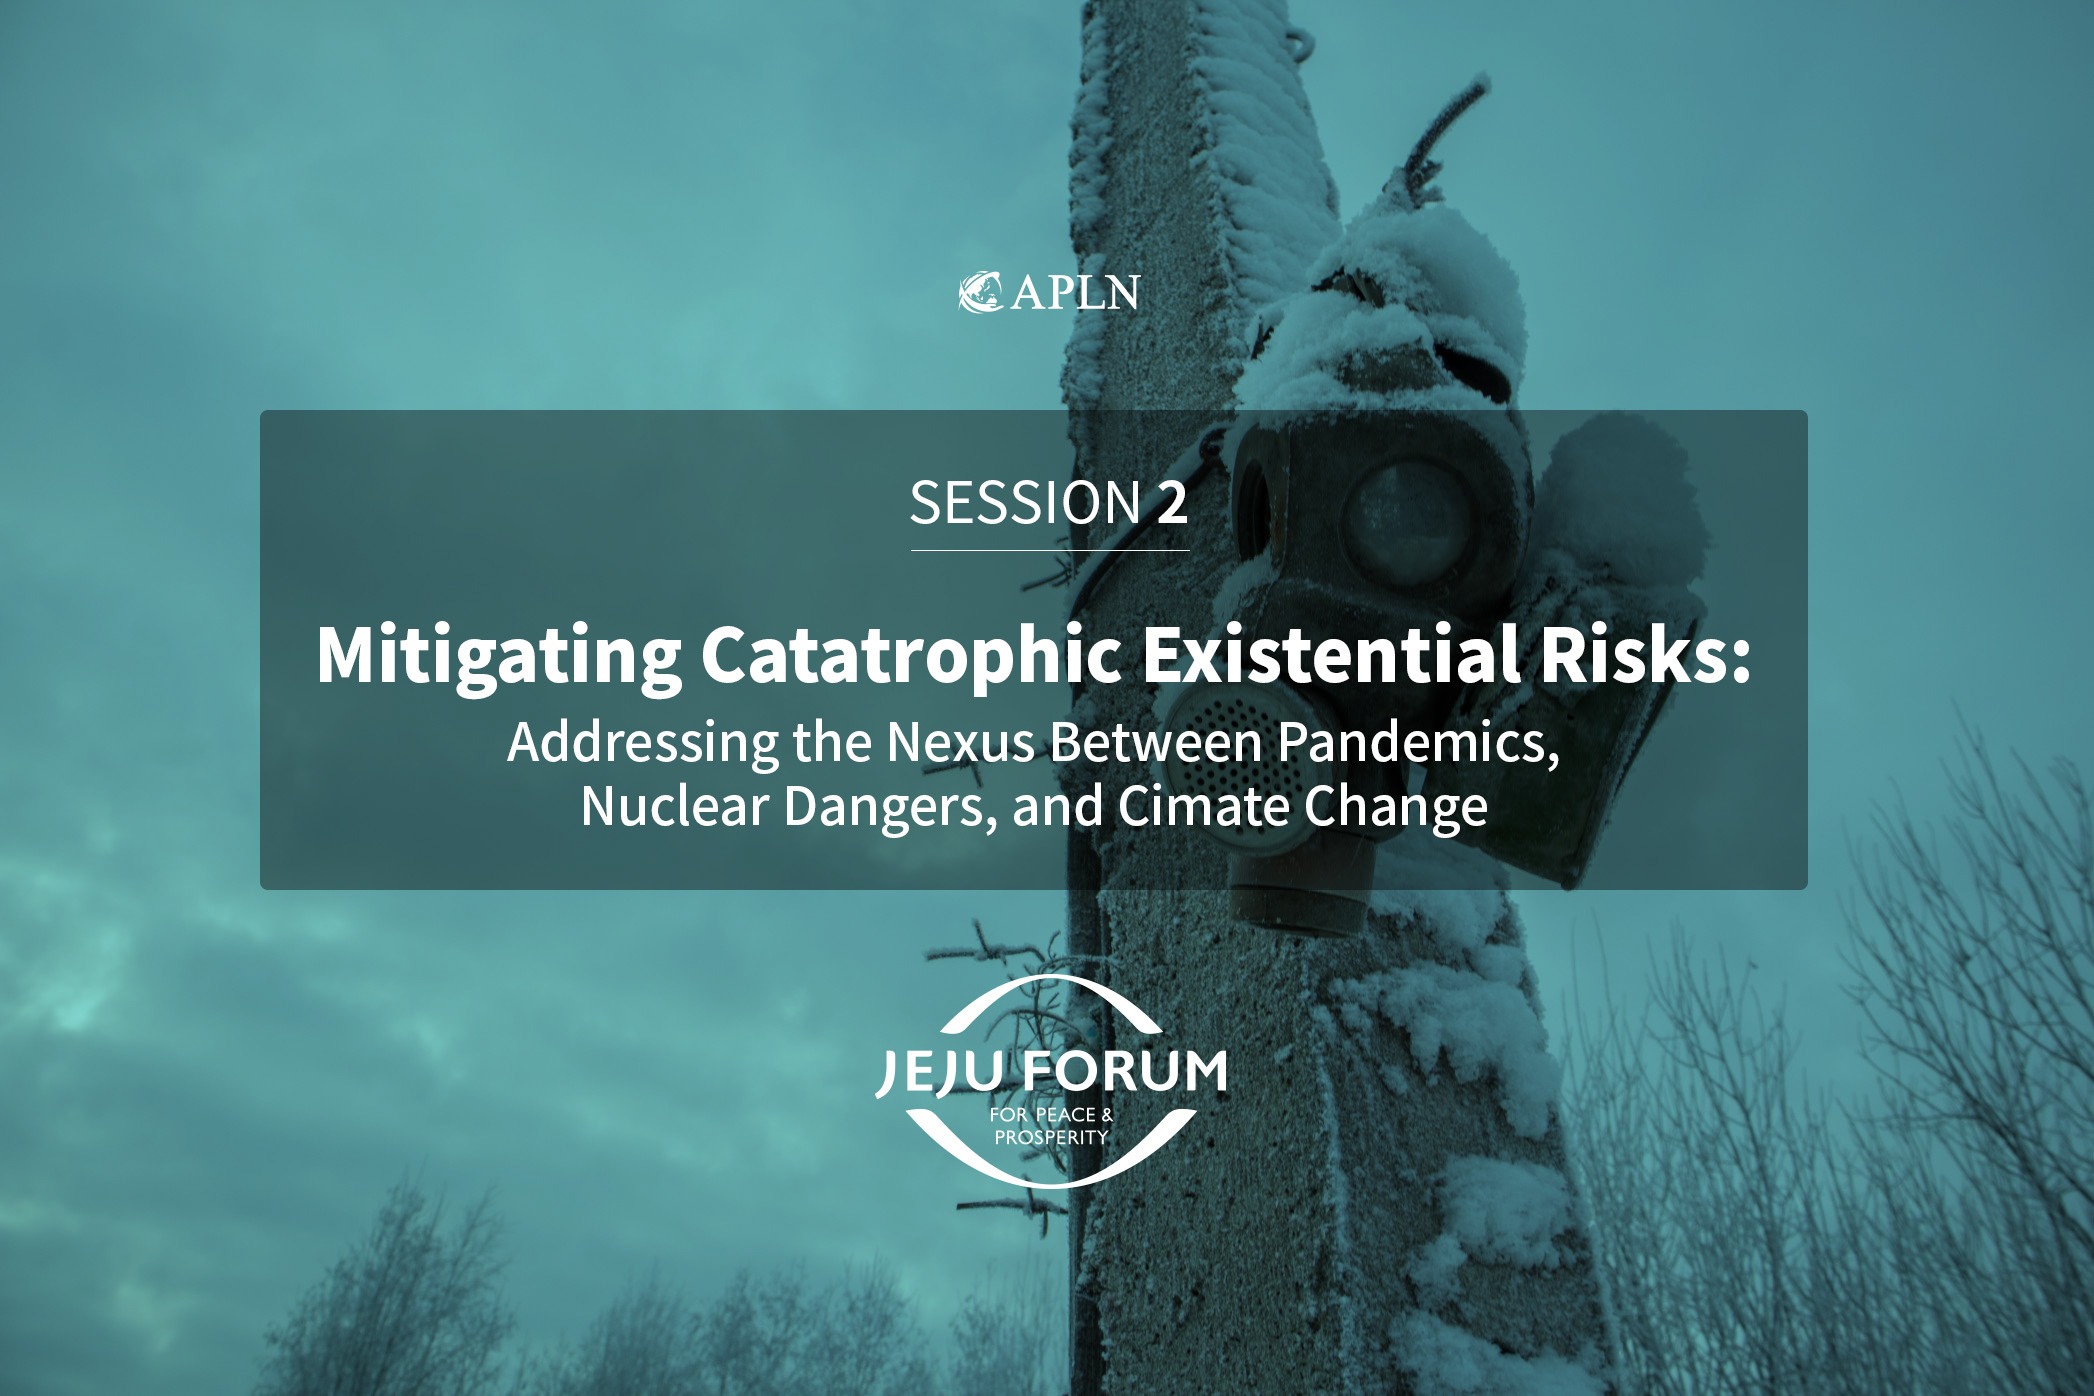 Mitigating Existential Catastrophic Risks: Pandemics, Nuclear Dangers, and Climate Change